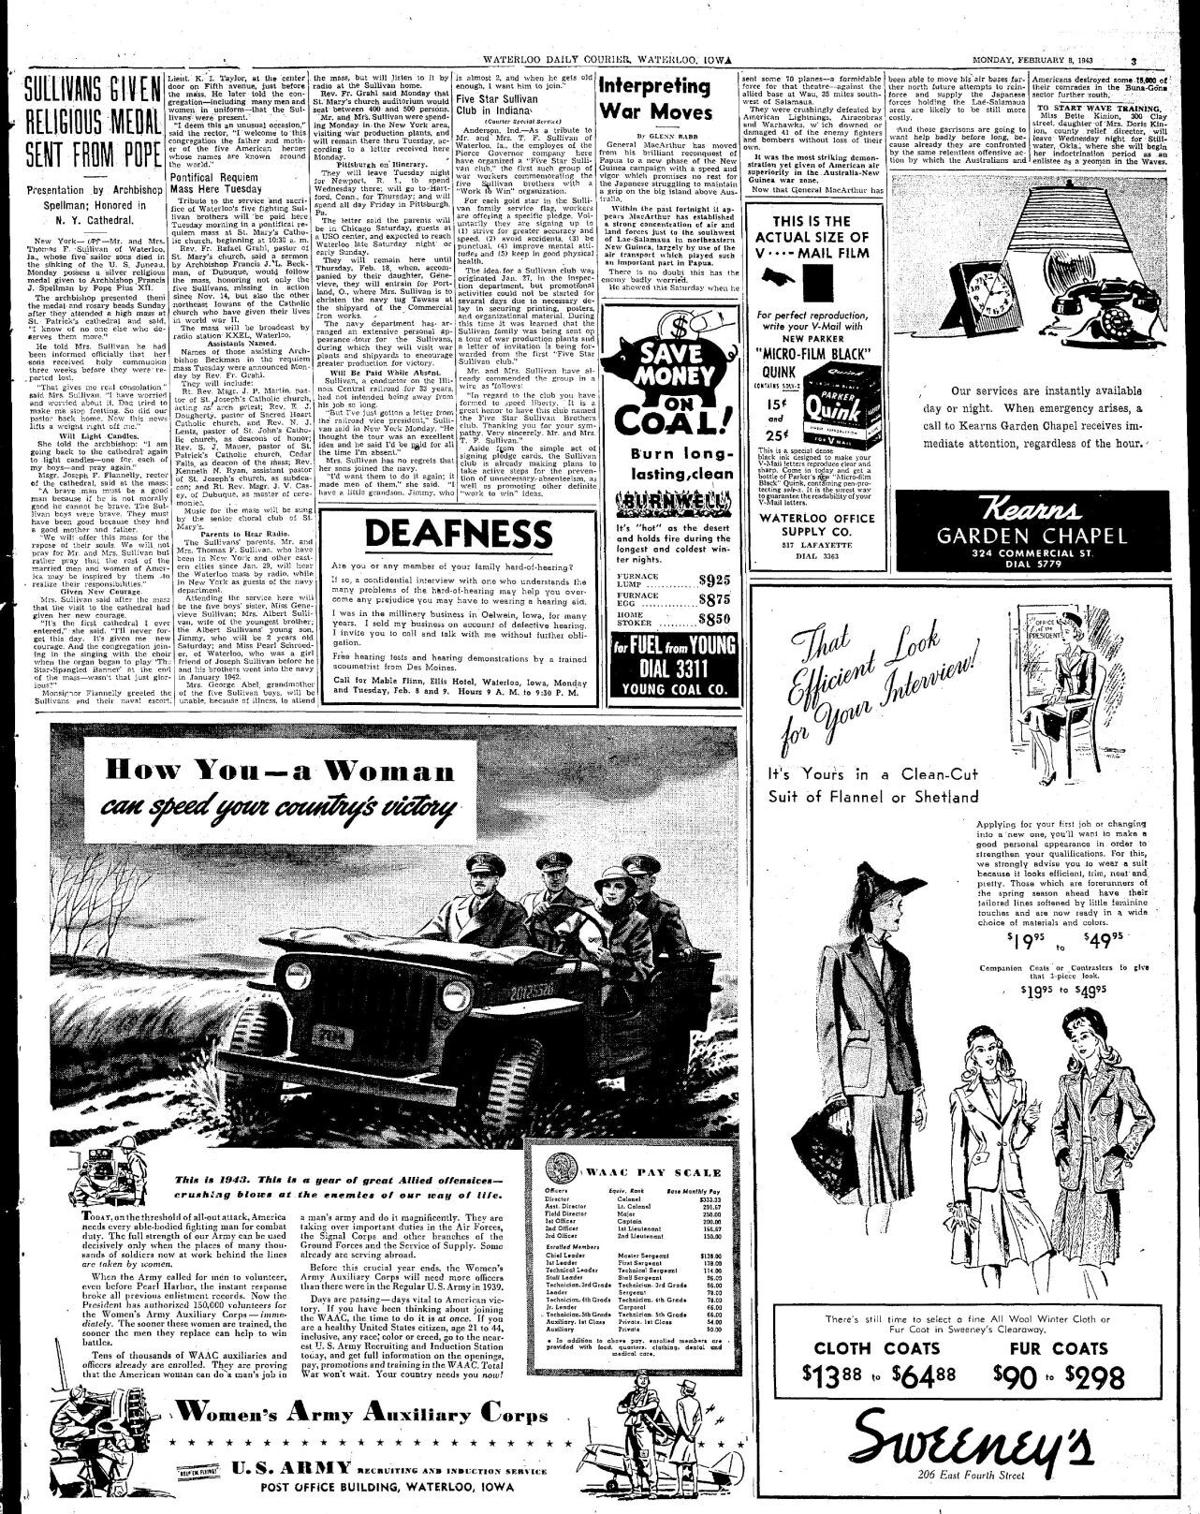 Courier Feb. 8, 1943